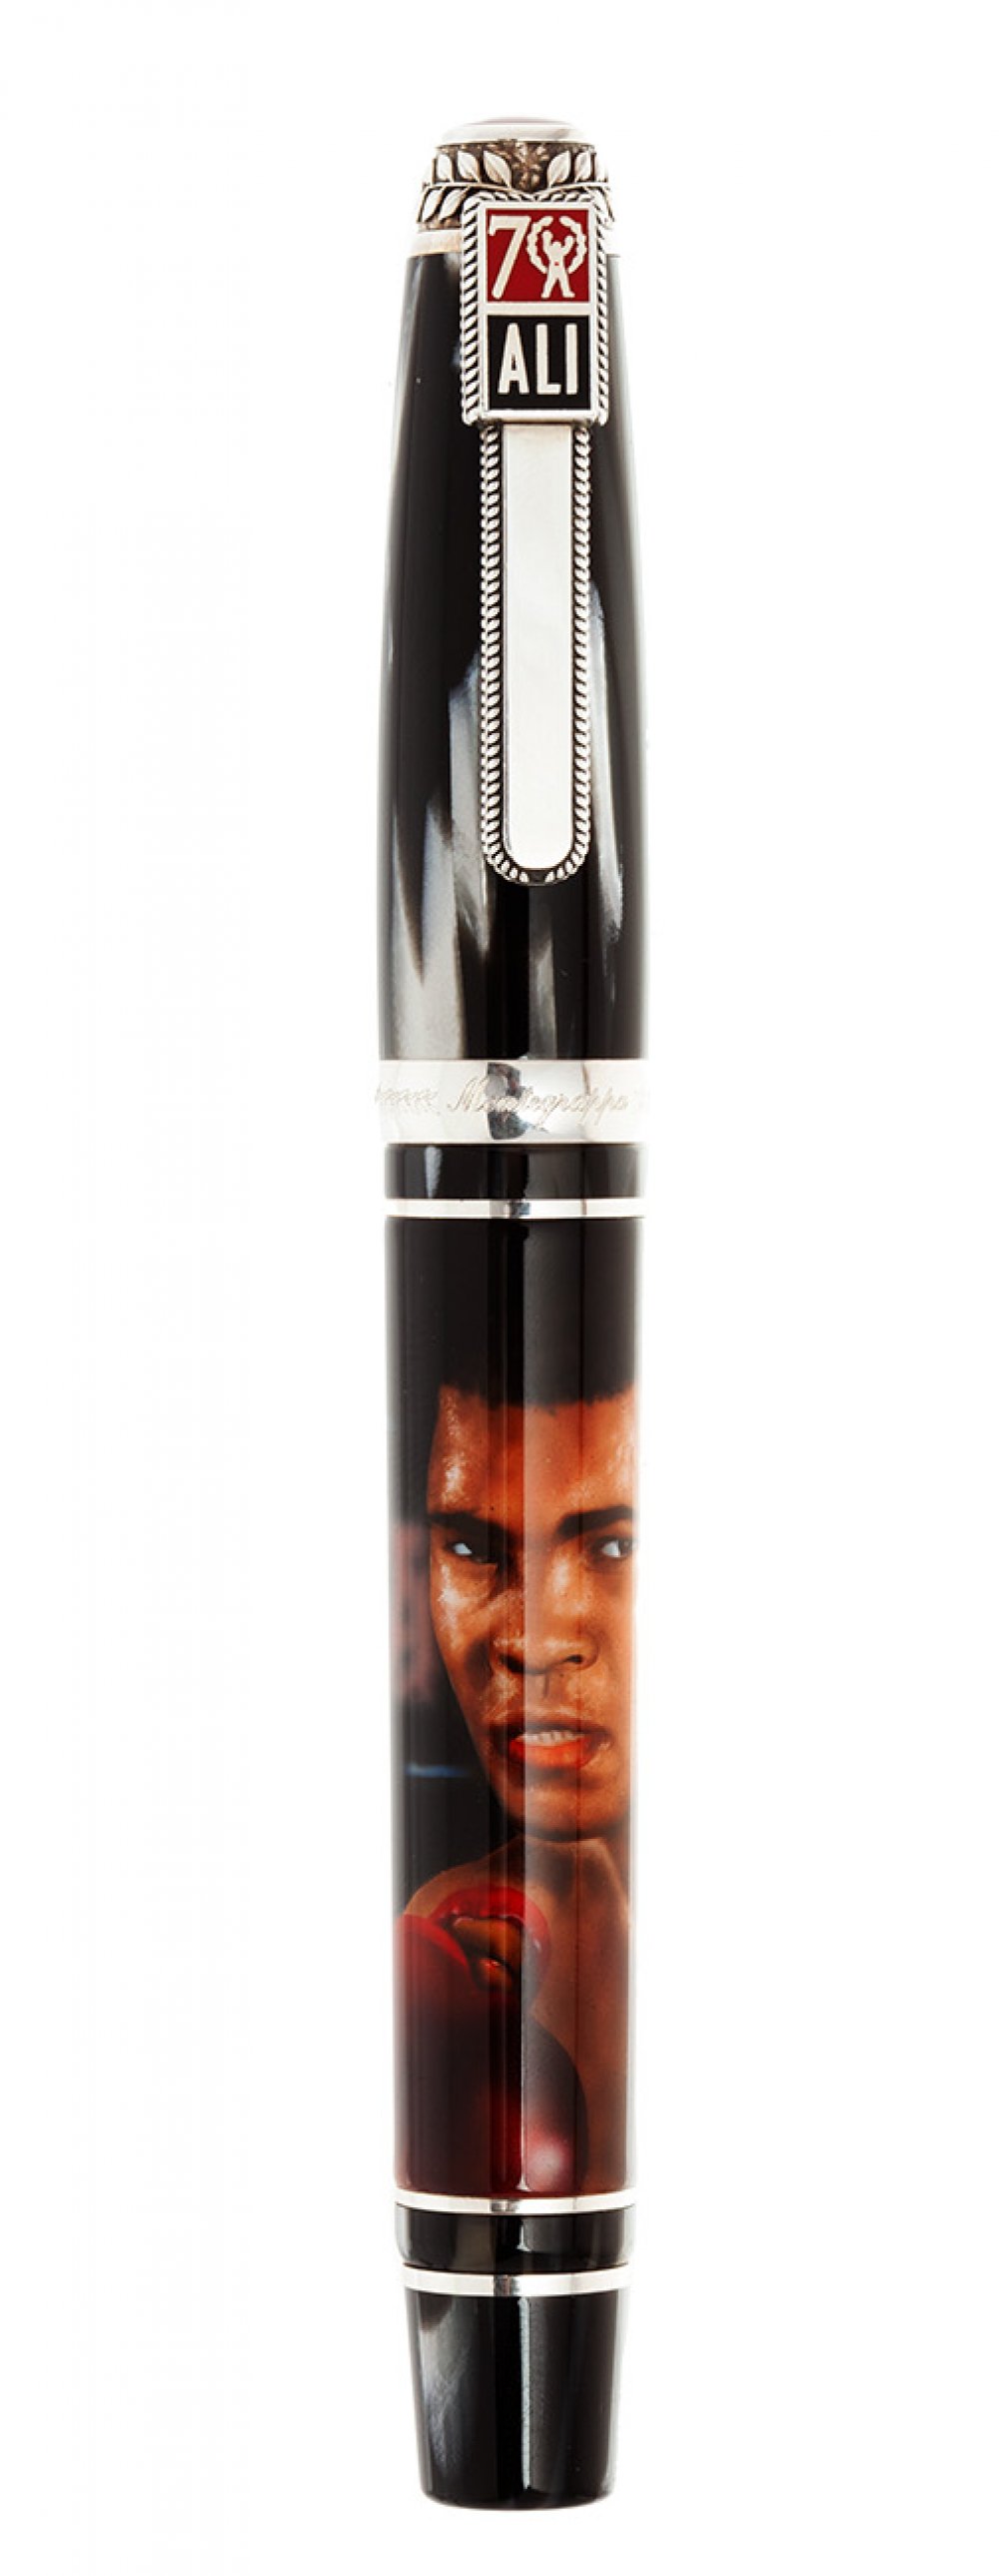 MONTEGRAPPA FOUNTAIN PEN, LIMITED EDITION "MUHAMMAD ALI".Resin barrel, hand painted.Two-tone 18